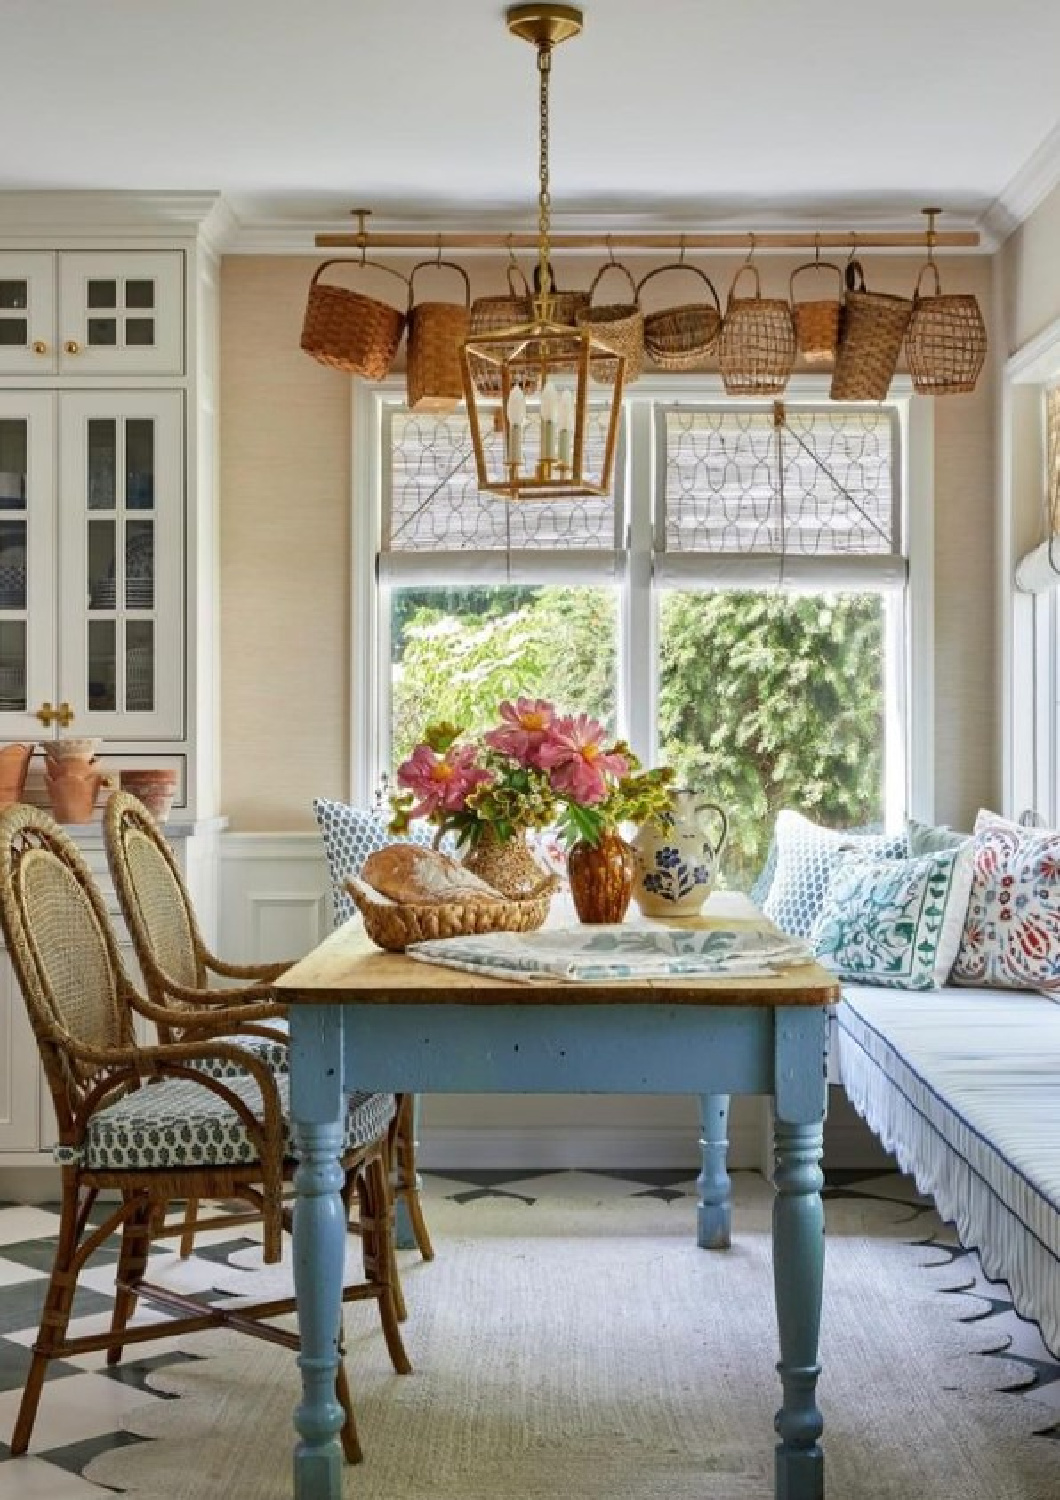 @stephperezstudio designed charming European country breakfast nook with baskets hung above windows and banquette. Photo: @kirstenrfrancis. #europeancountry #breakfastnooks